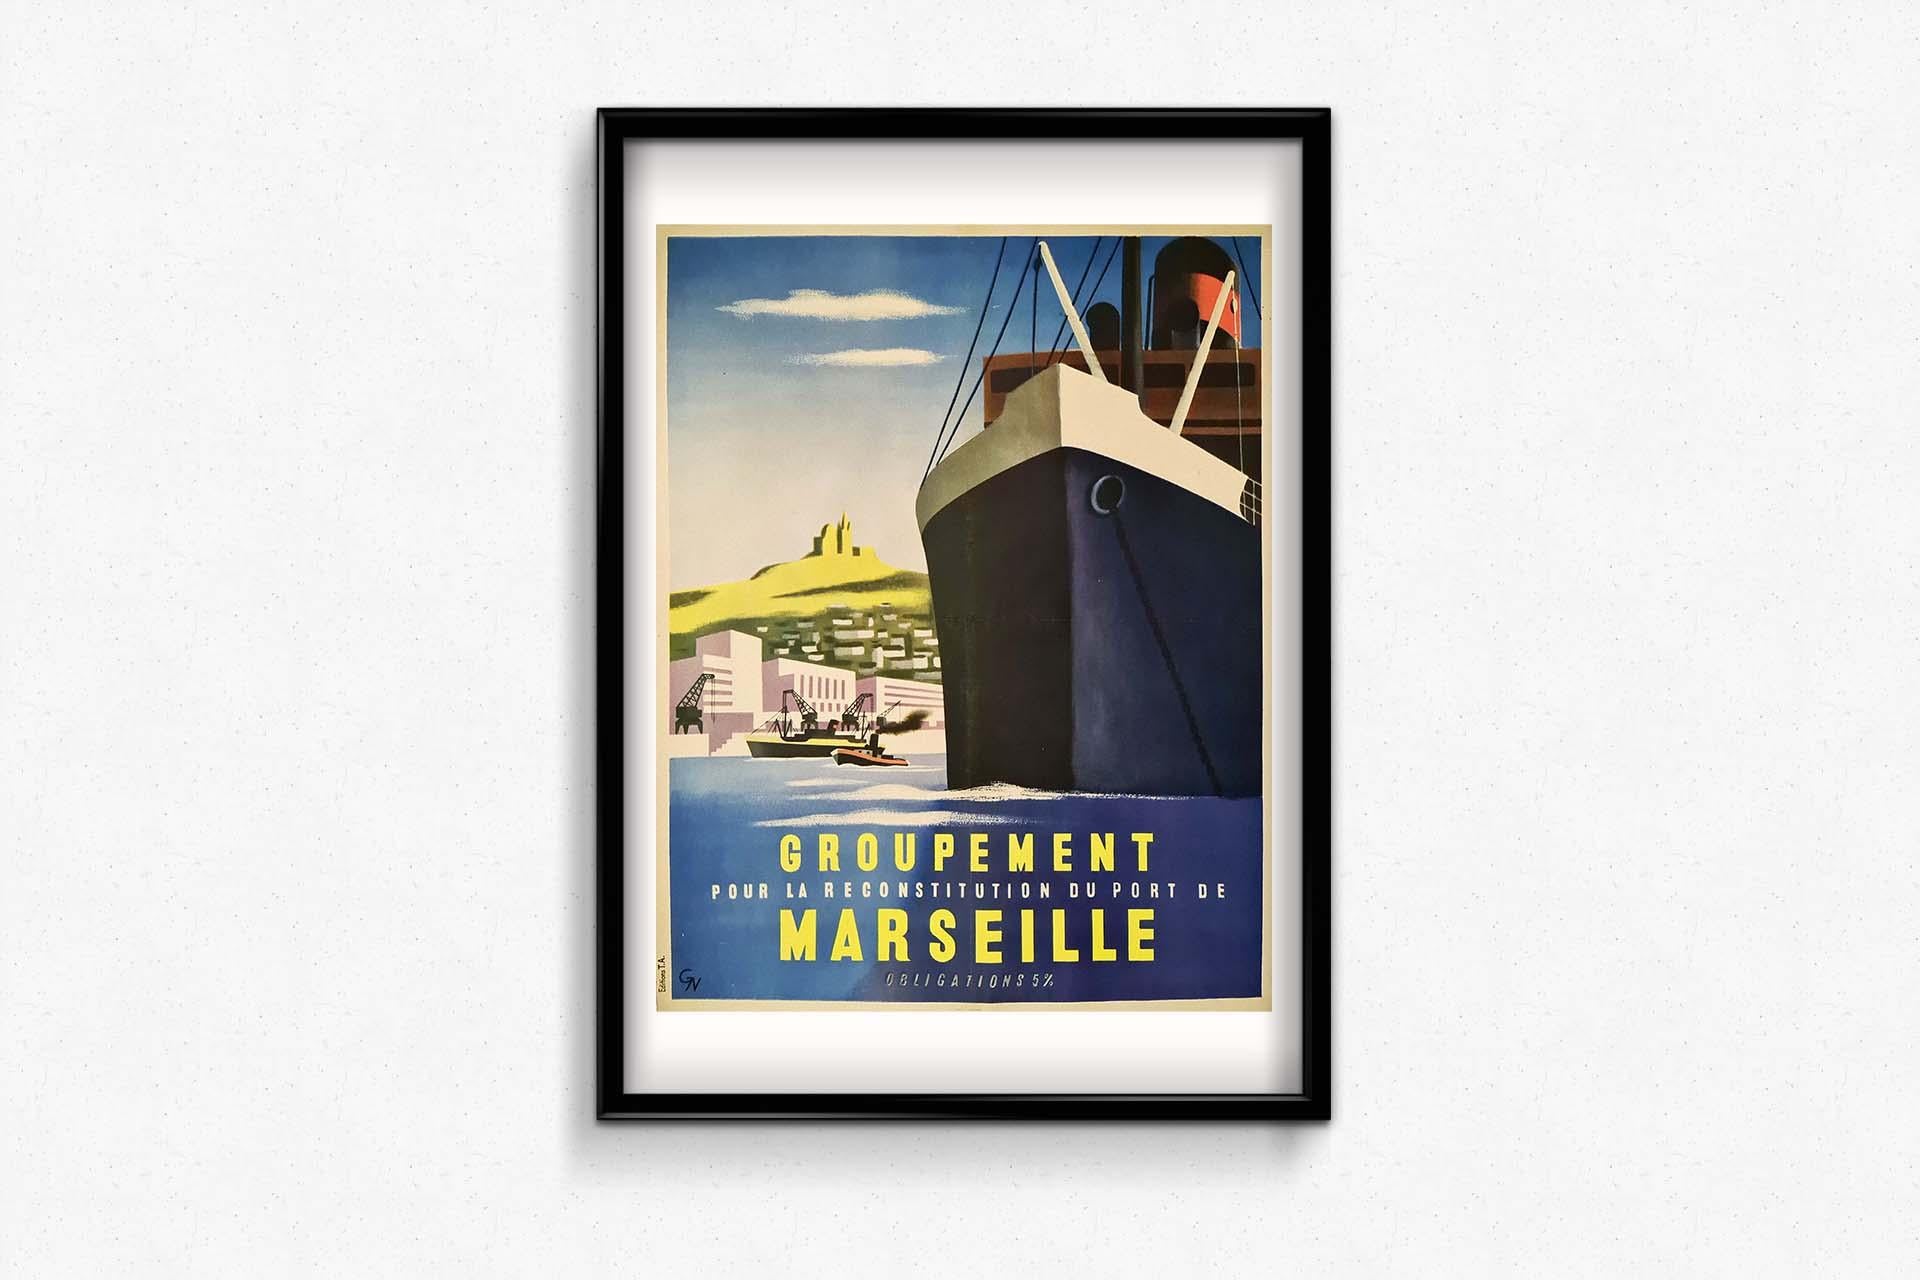 In 1947, Nathan Garamond, a distinguished artist of his time, bestowed the world with a visual masterpiece in the form of the original travel poster titled 